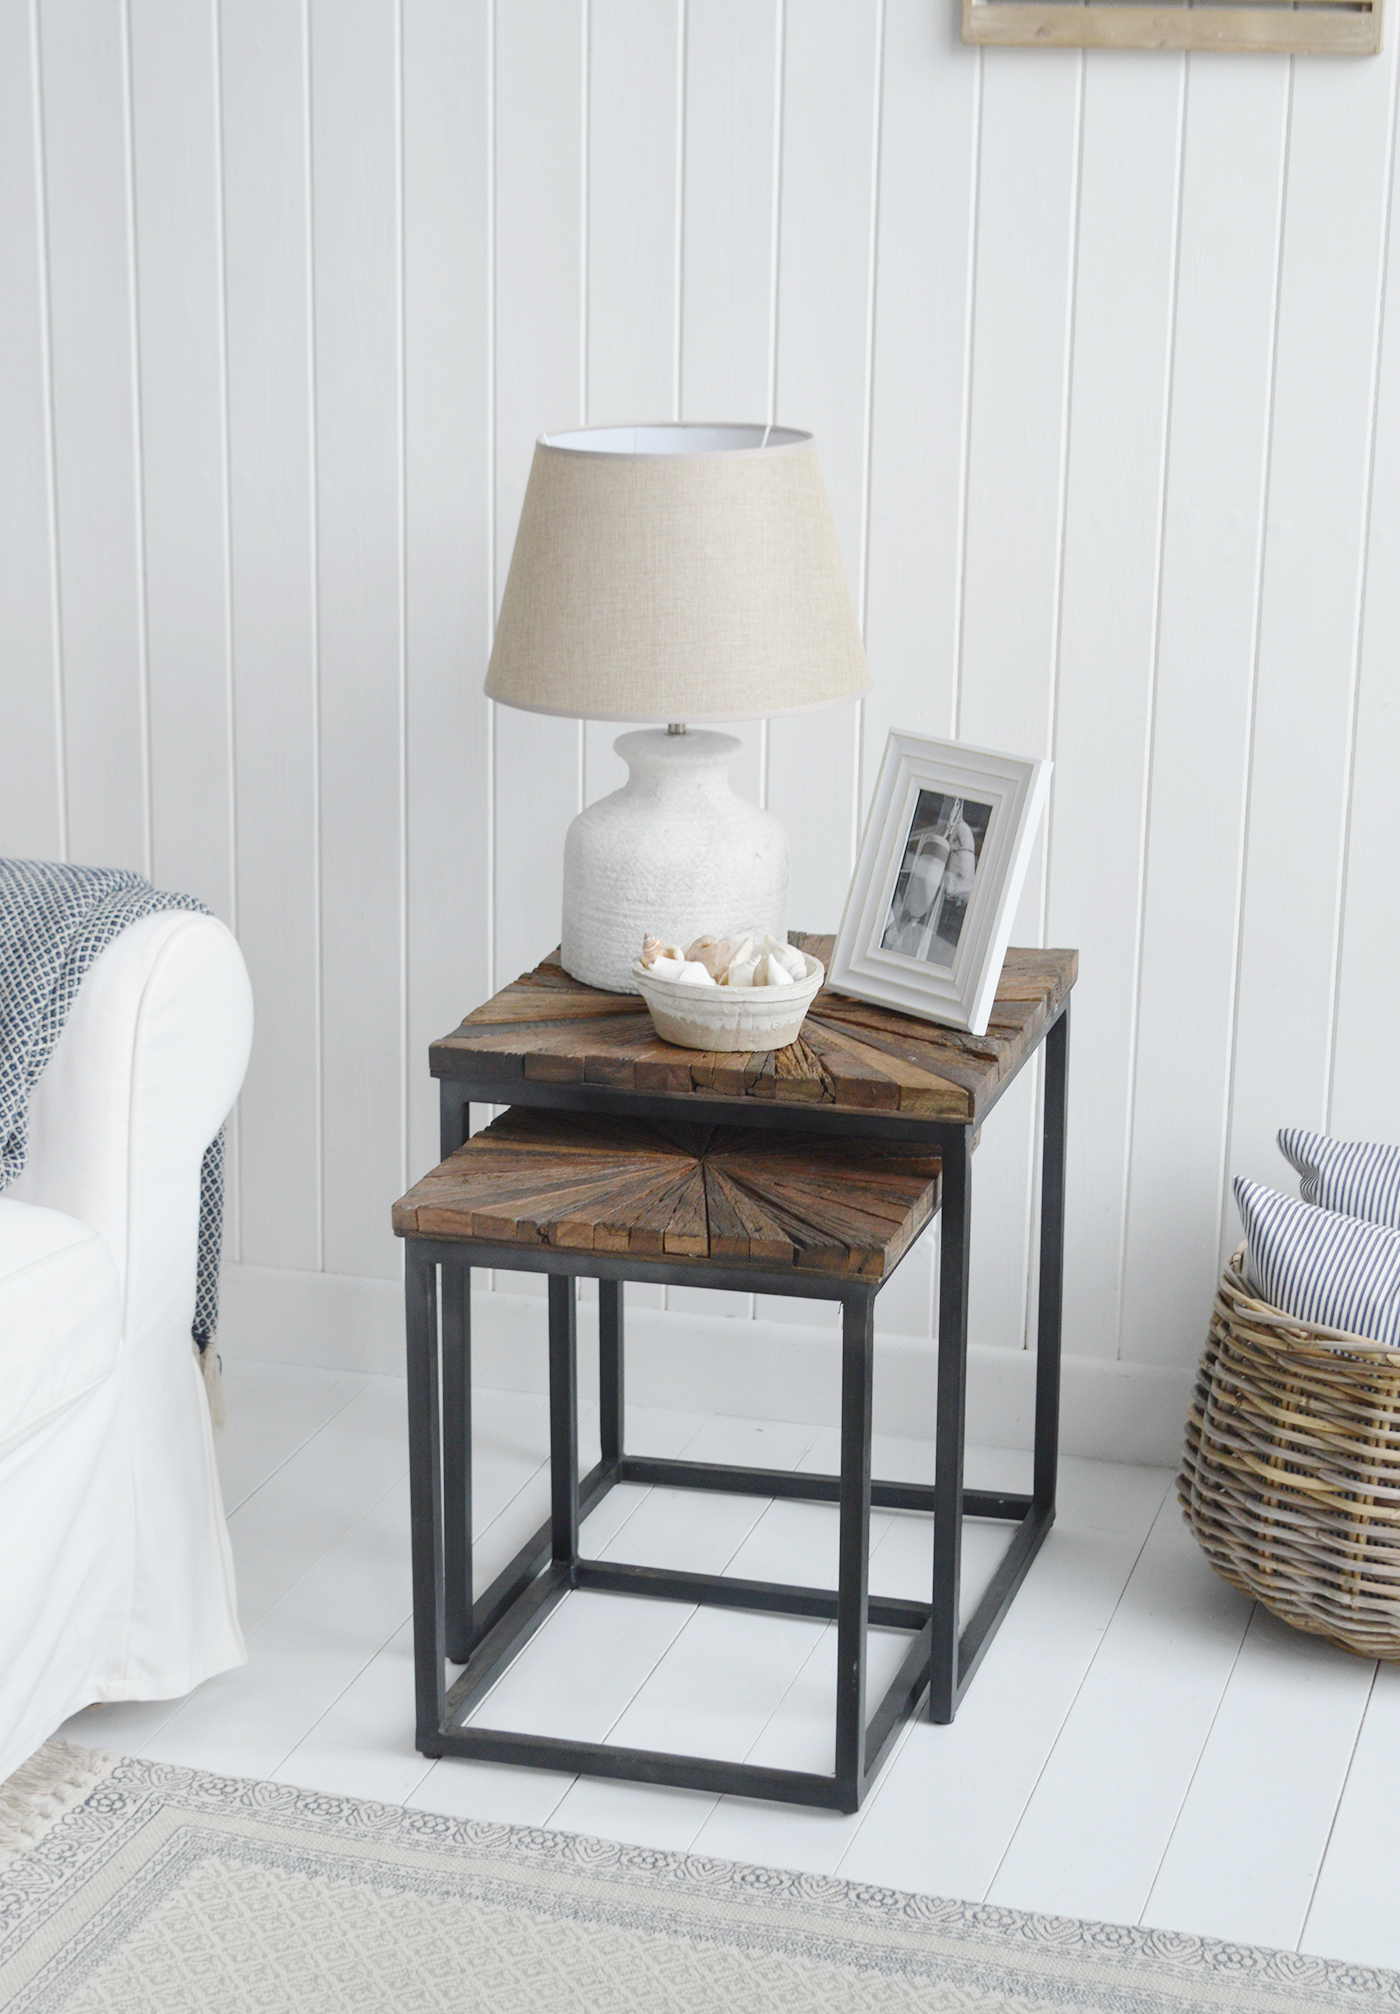 Woodstock Nest of Square Tables - New England Coastal and Modern Farmhouse furniture